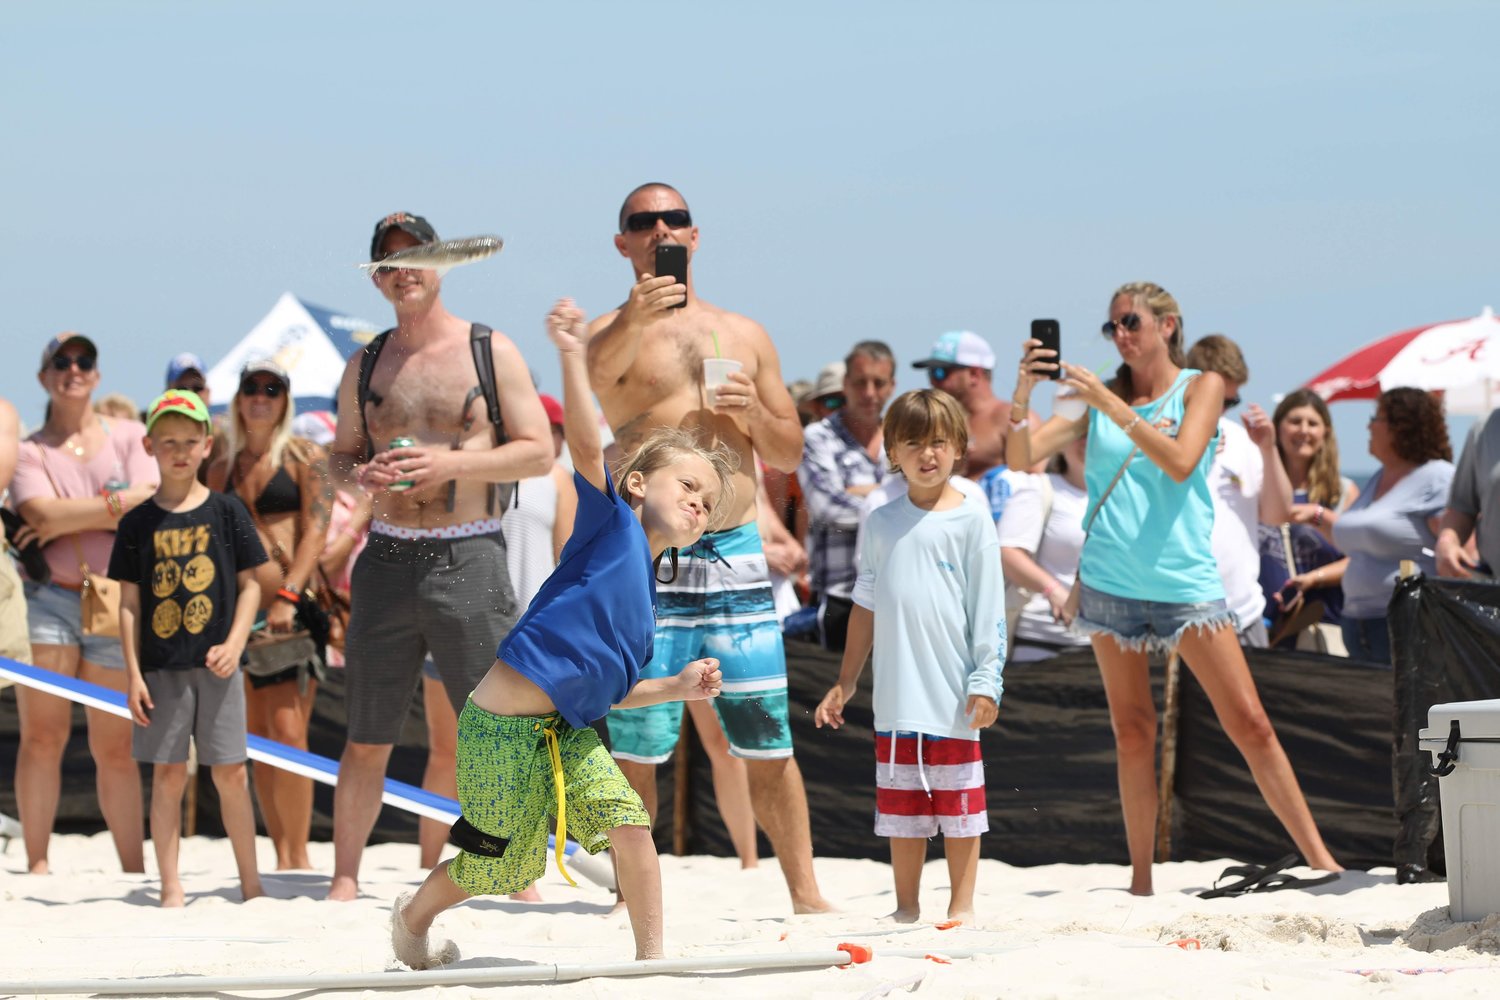 The Interstate Mullet Toss and Gulf Coast’s Greatest Beach Party fun starts Friday, April 23 and runs through Sunday.